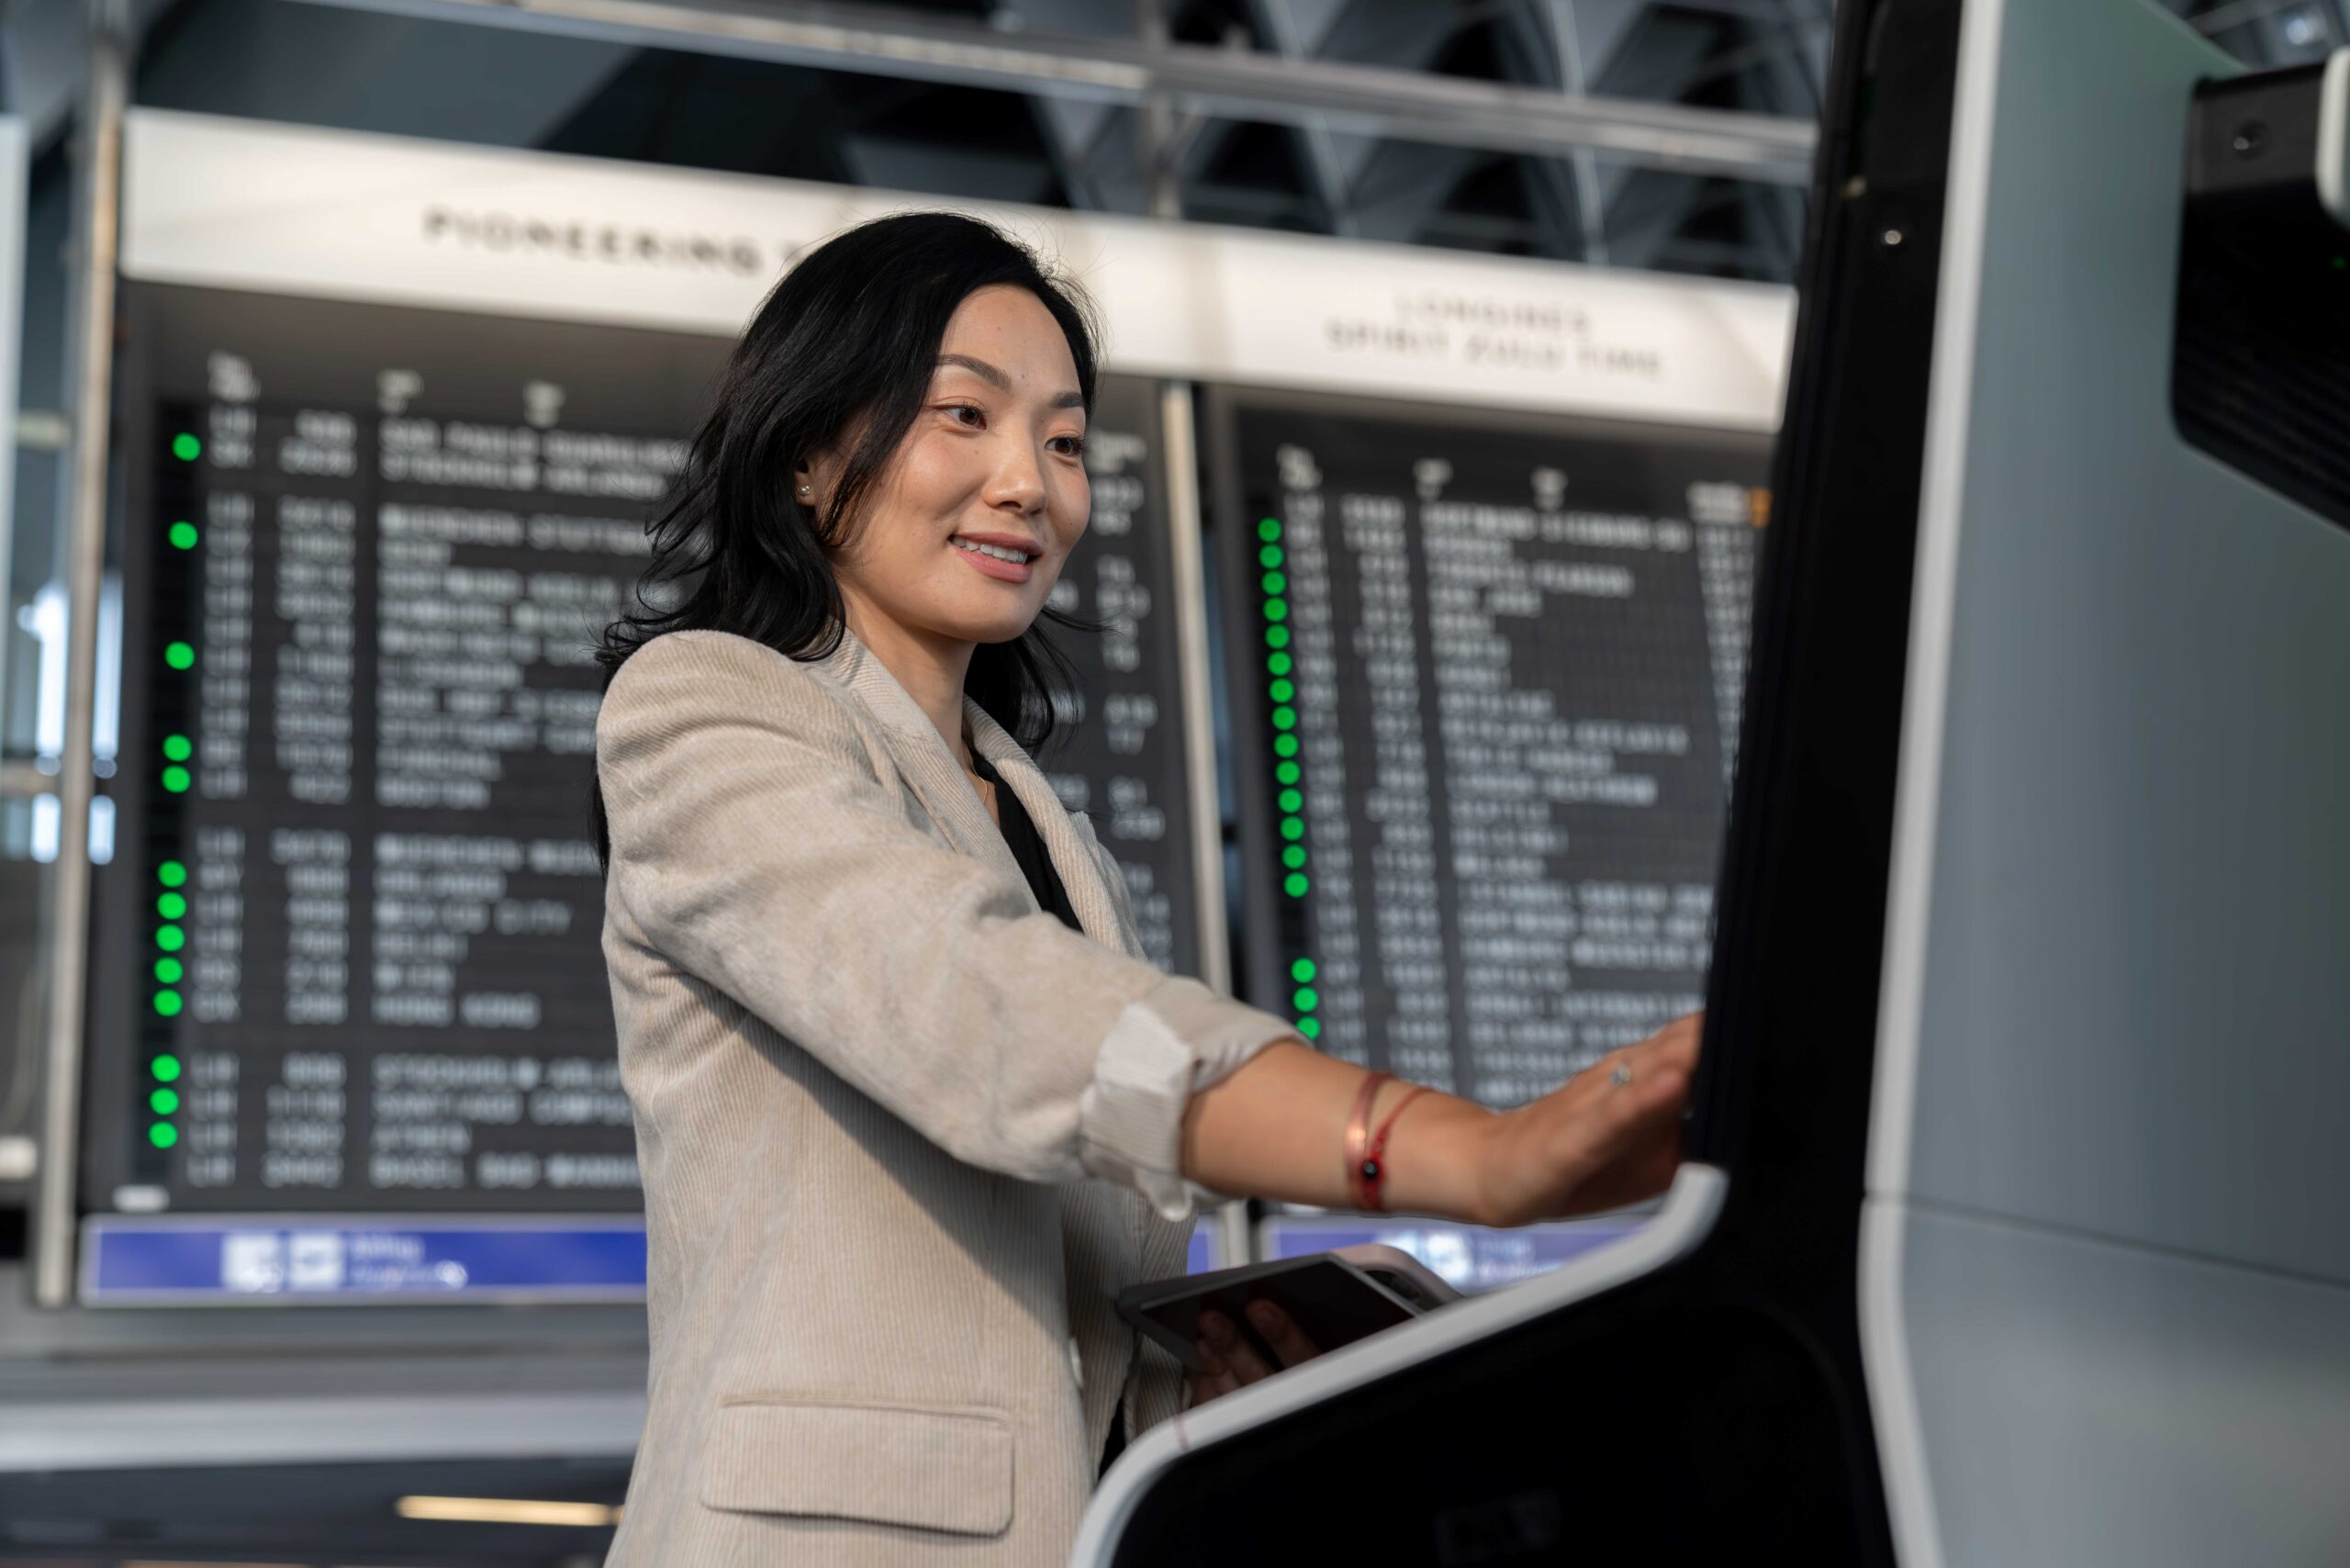 With facial recognition from check-in to boarding, SITA and Fraport will enable passengers of all airlines to travel contactless